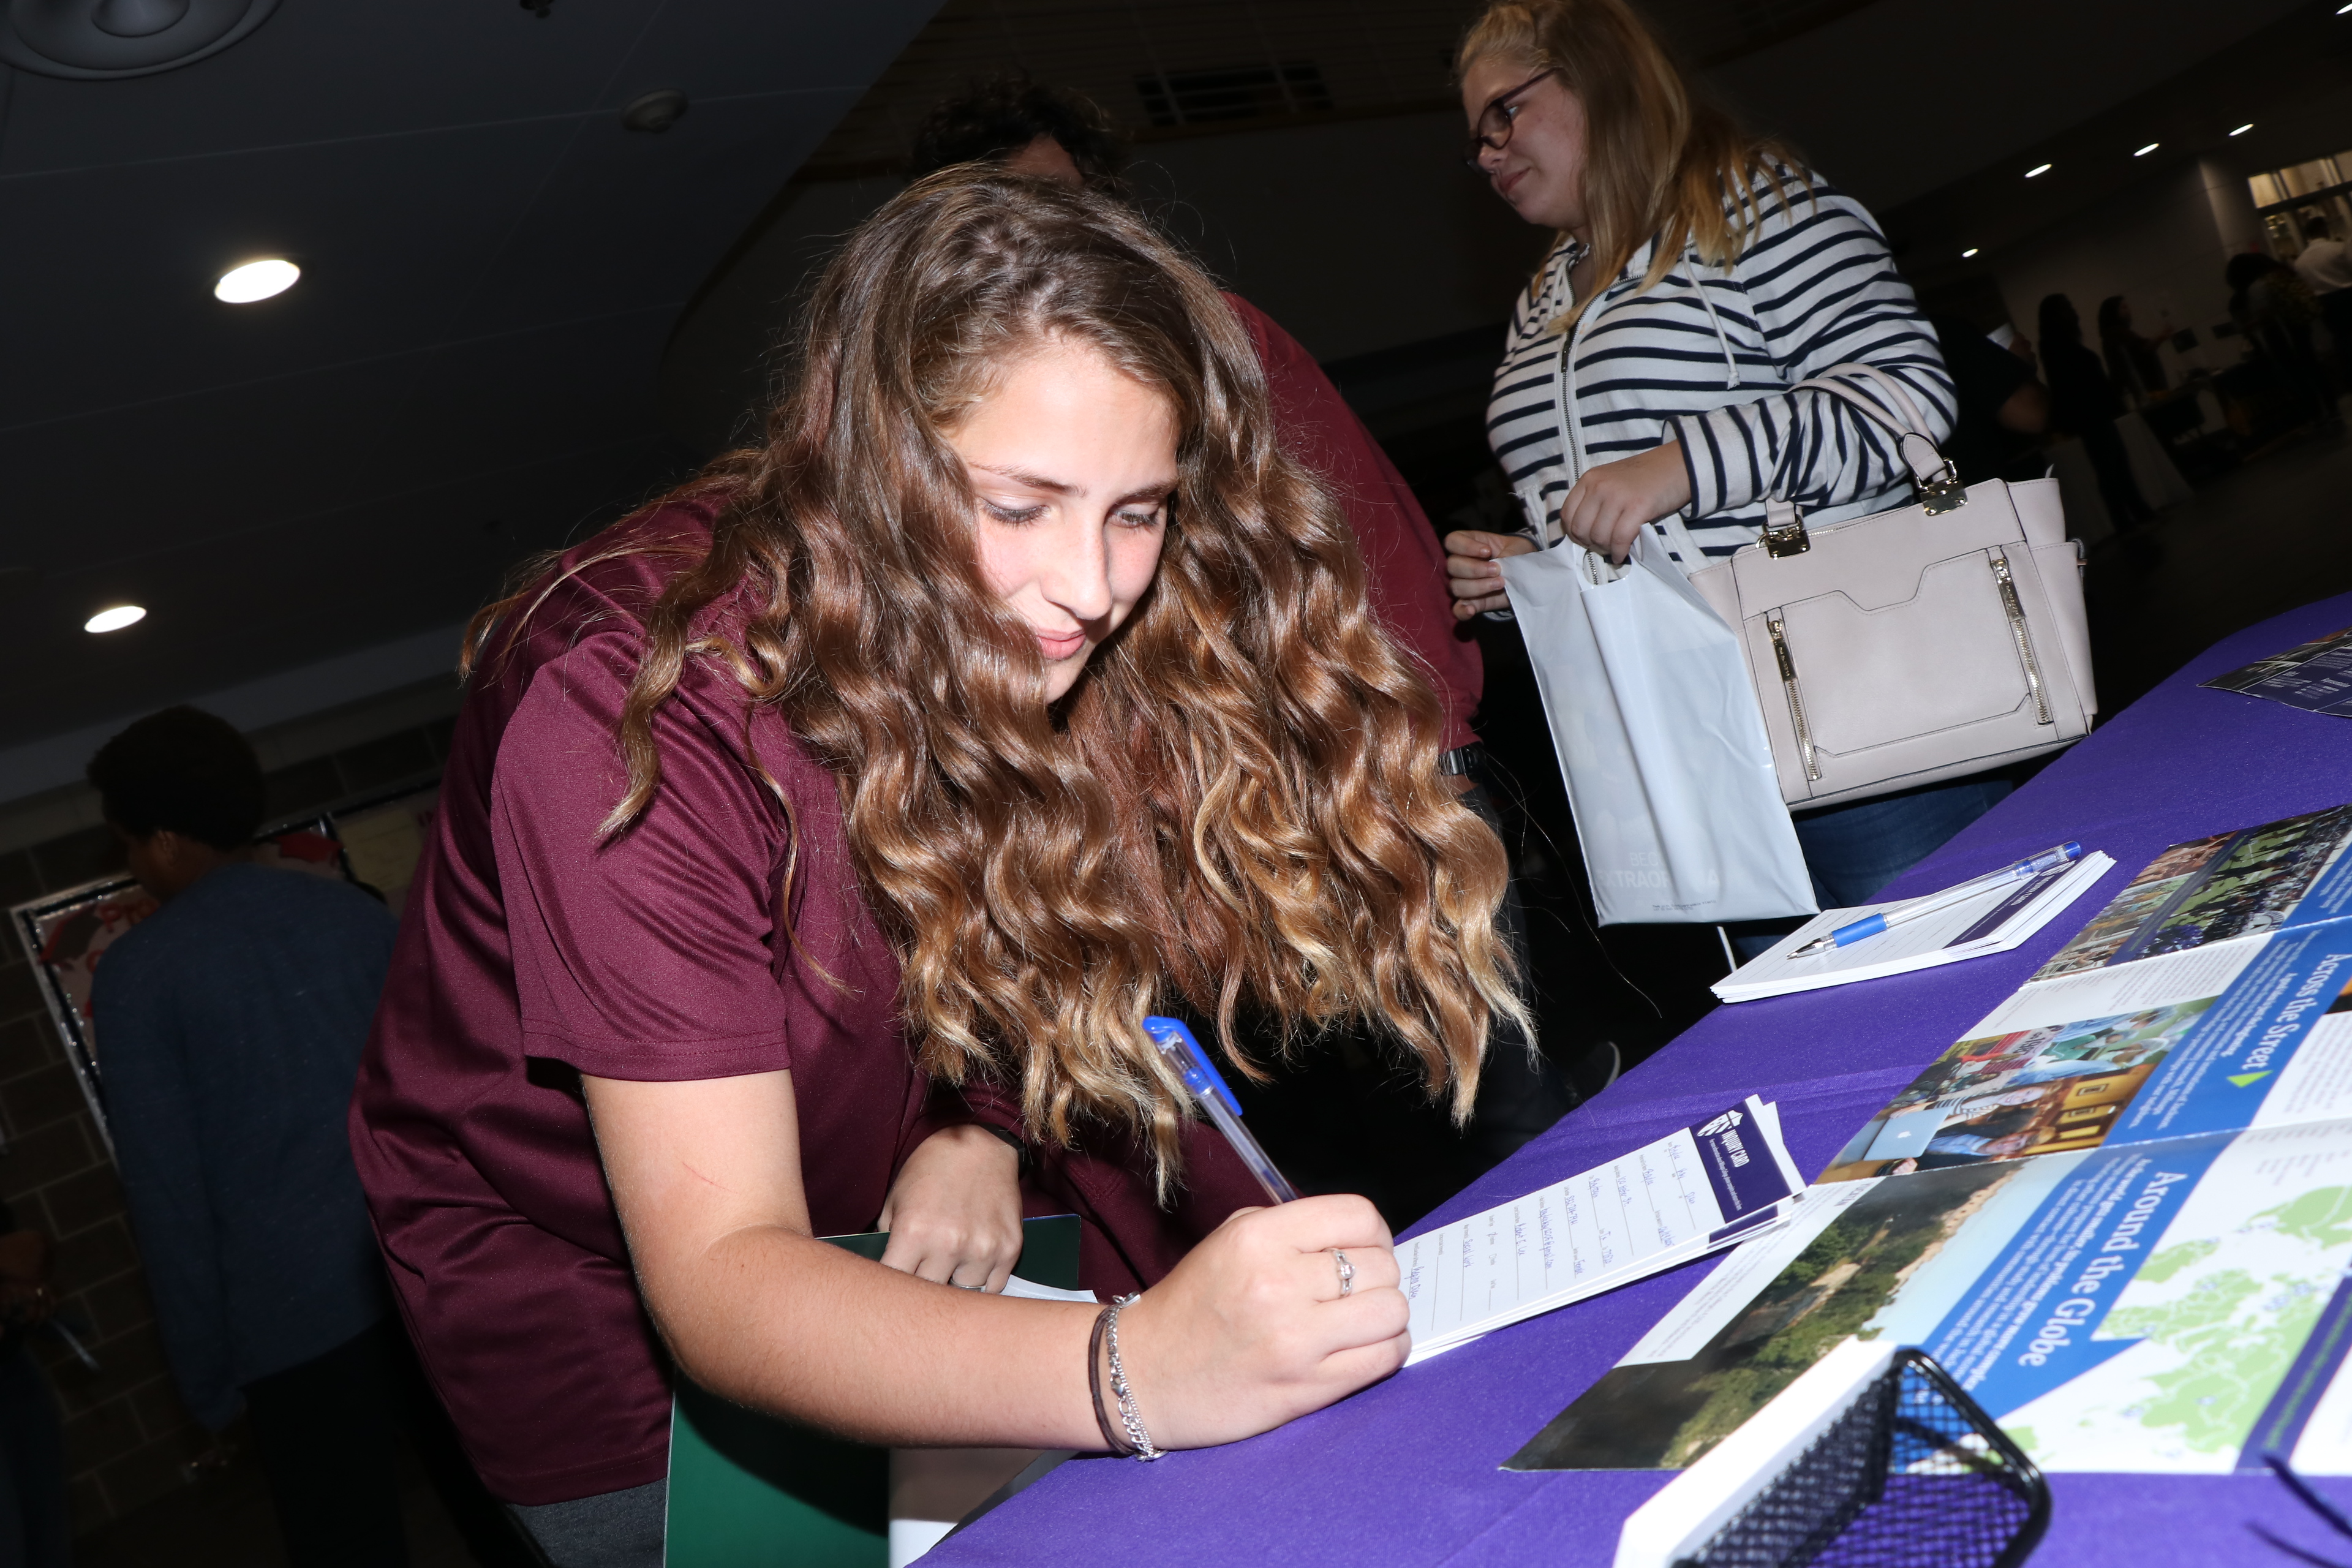 Baylee Dixon, a freshman at Robert E. Lee High School, signs up for information about Millsaps Colle